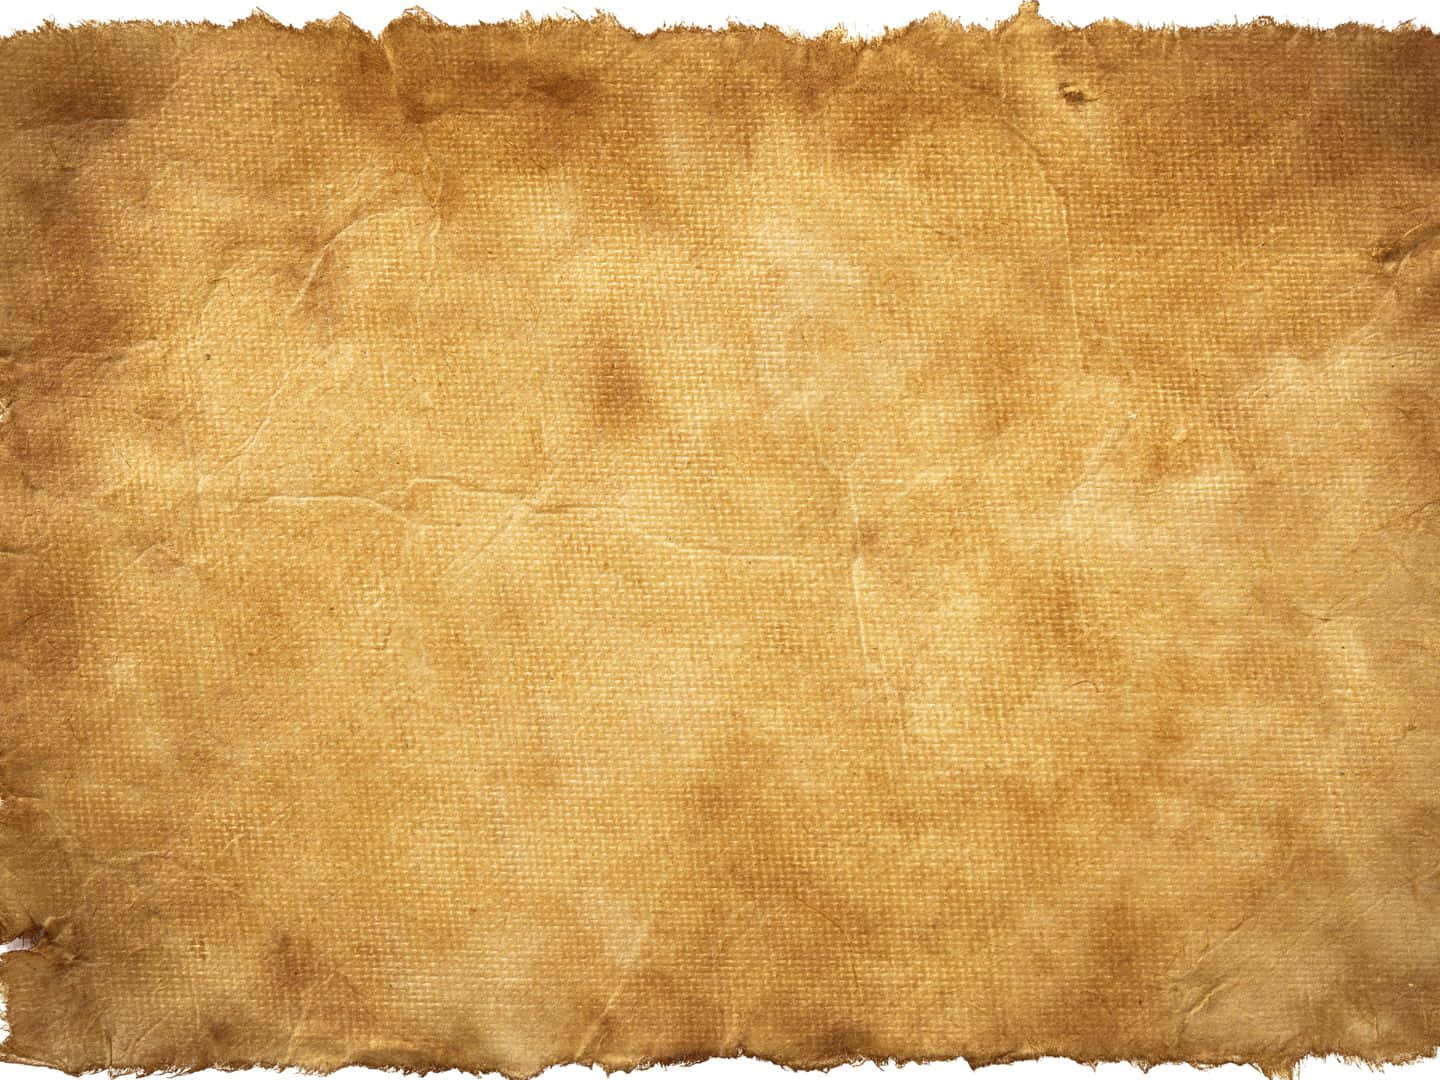 Parchment Background With Dark Brown Stains